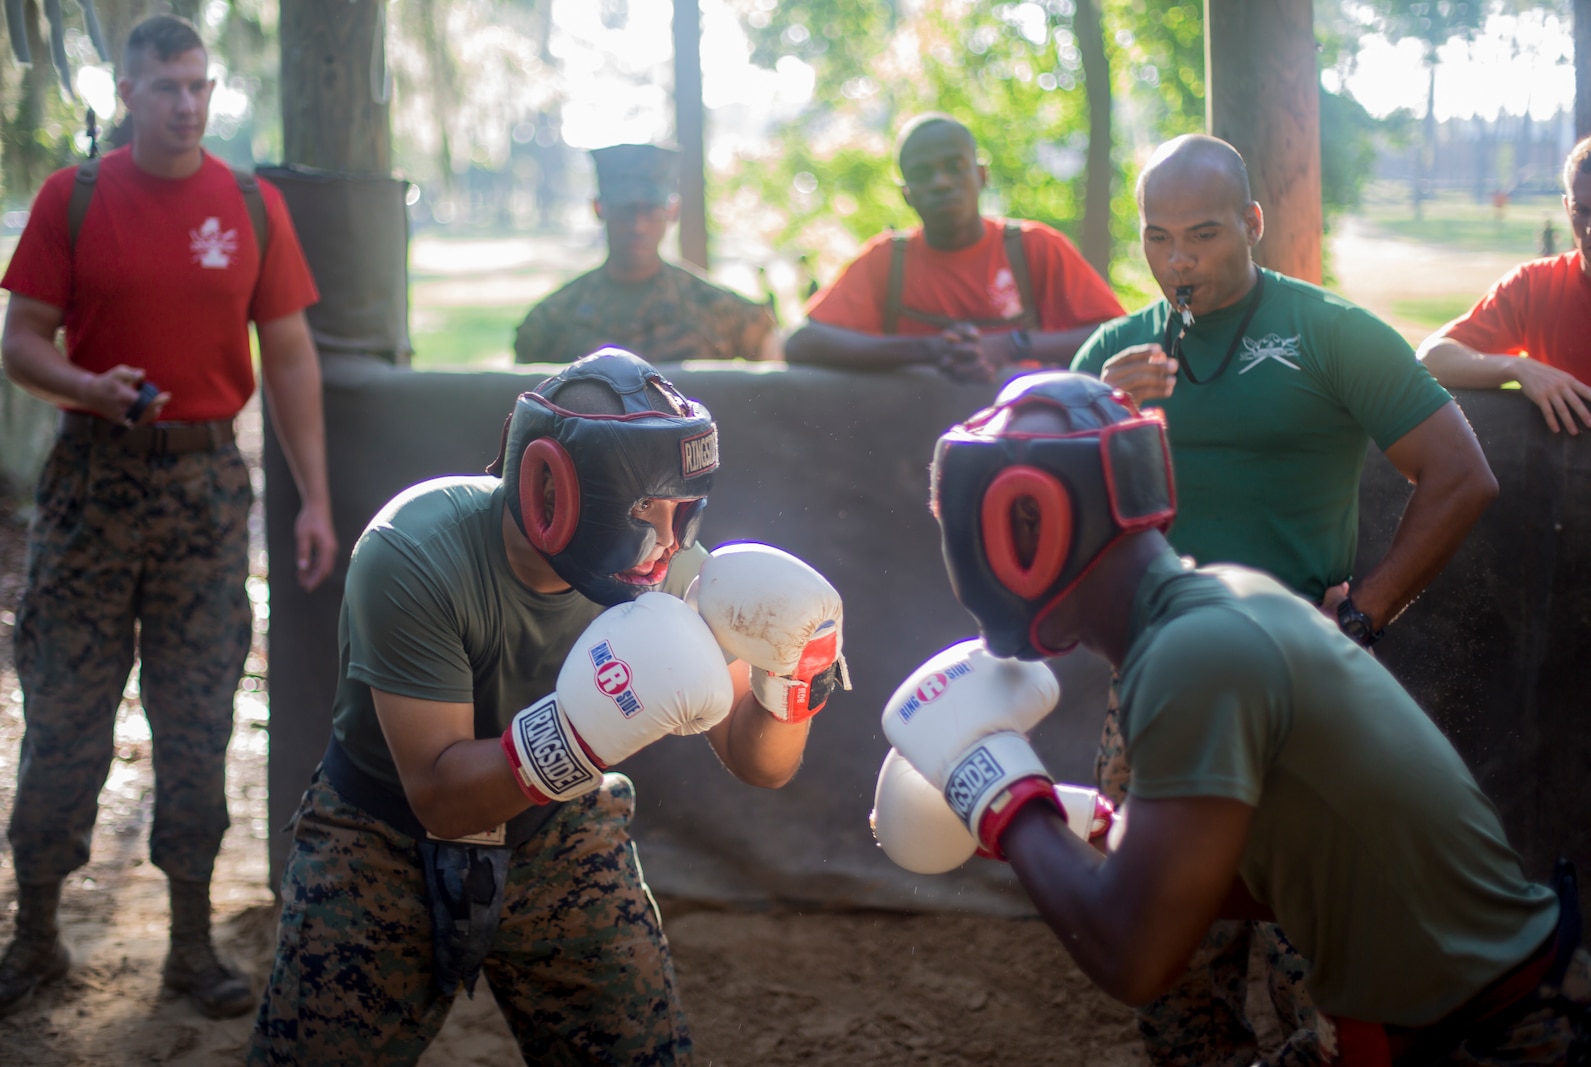 Recruits with Delta Company, 1st Recruit Training Battalion, practice the fundamentals of body sparring on Marine Corps Recruit Depot Parris Island, S.C., July 25, 2019. Body sparring is an exercise that exemplifies the fundamentals of Marine Corps Martial Arts and forces recruits to overcome physical and mental fatigue. (U.S. Marine Corps photo by Lance Cpl. Dylan Walters)